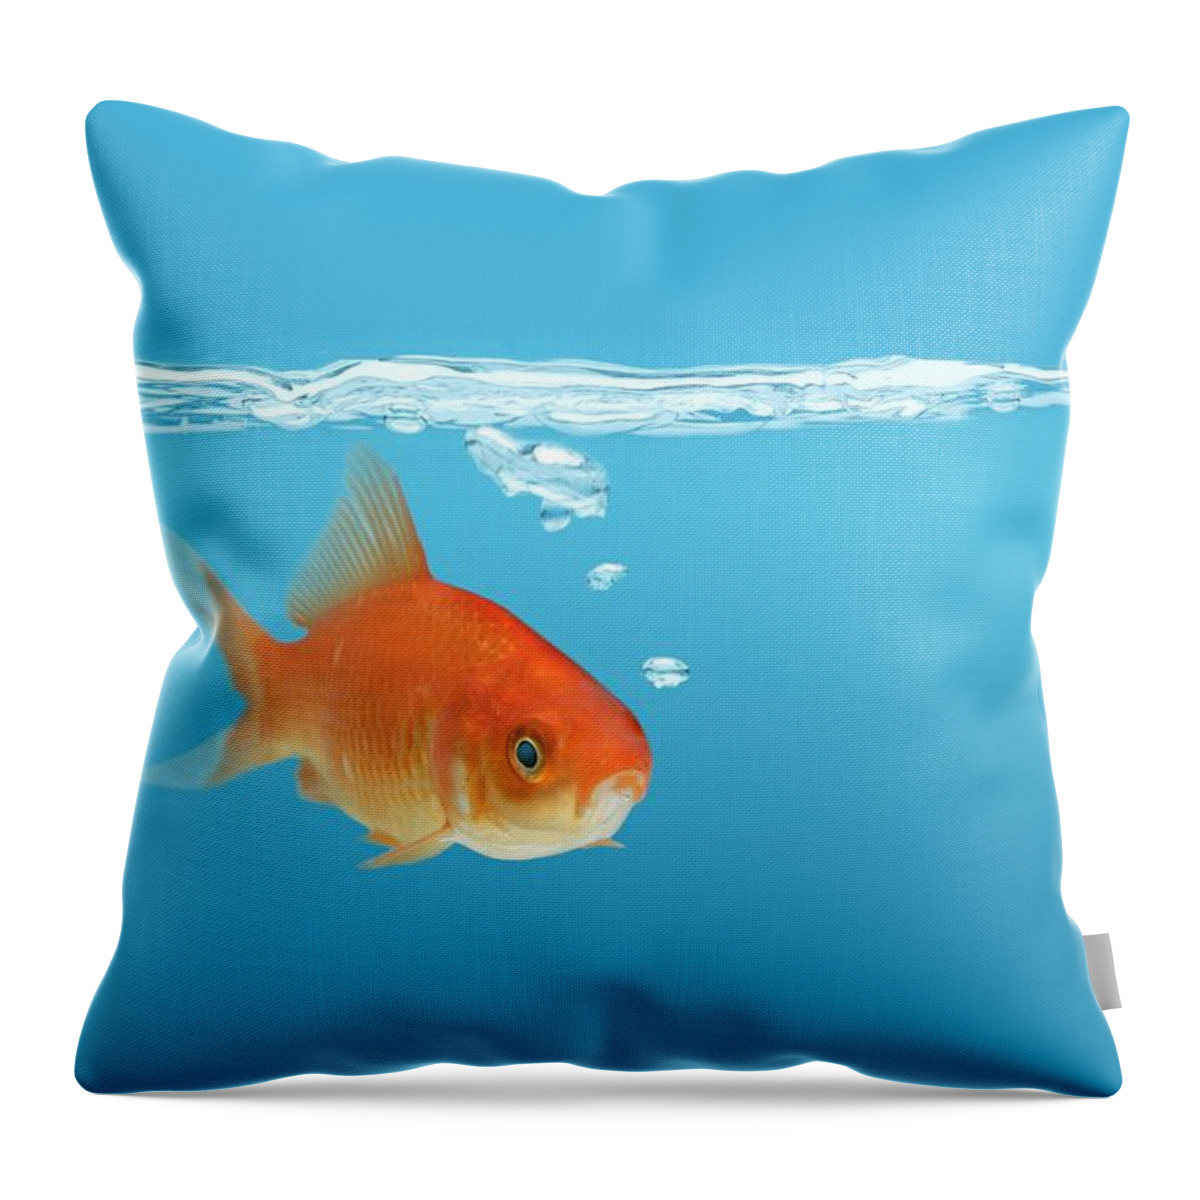 Alone Throw Pillow featuring the photograph Goldfish Carassius Auratus by Don Hammond